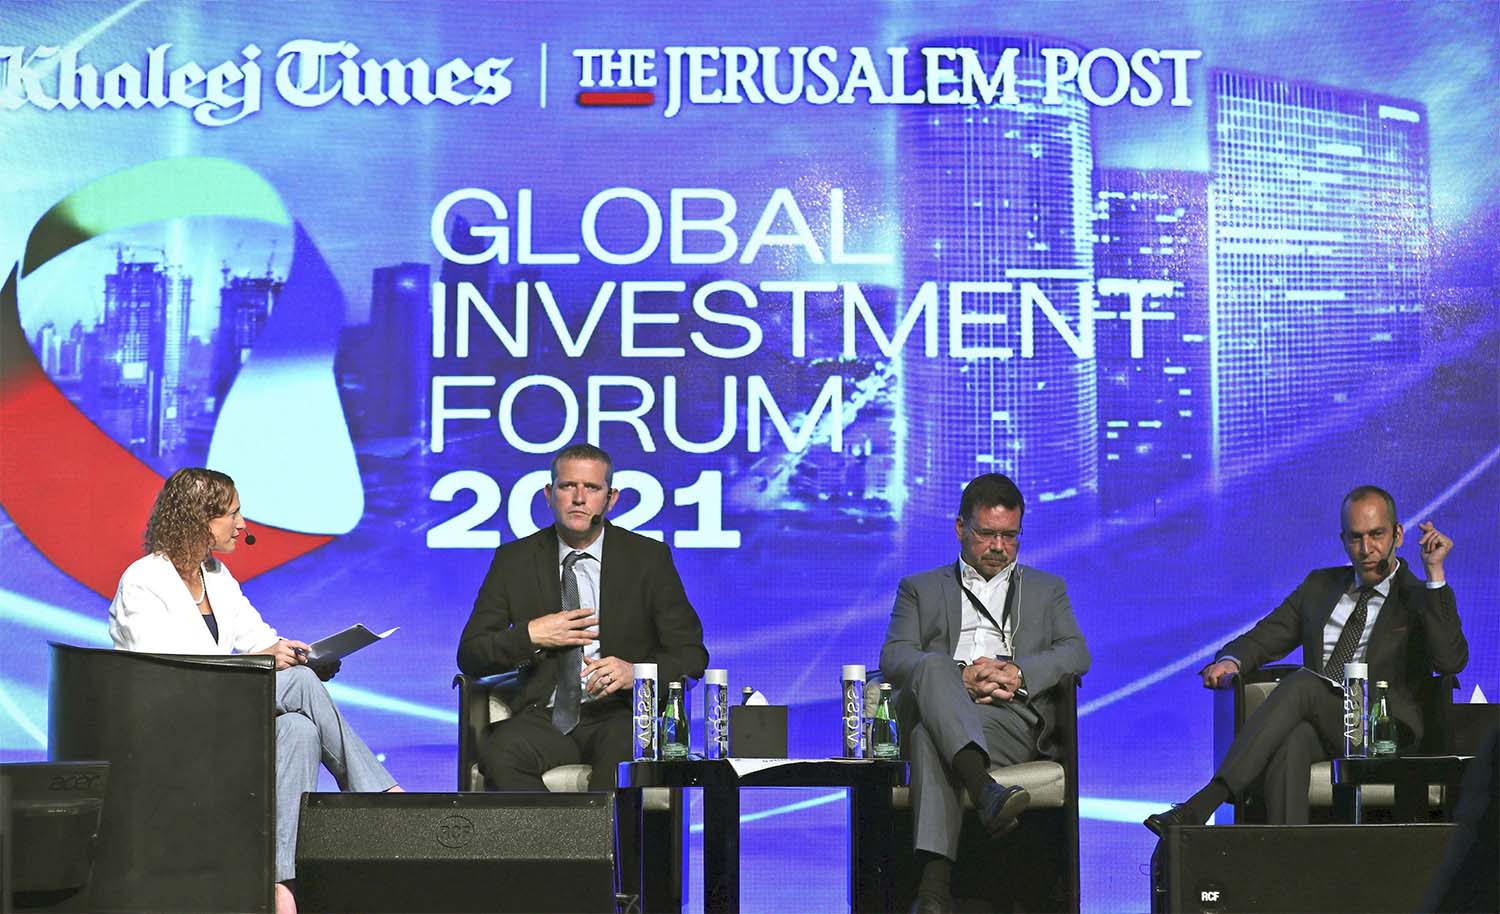 Talking business at the Global Investment Forum in Dubai